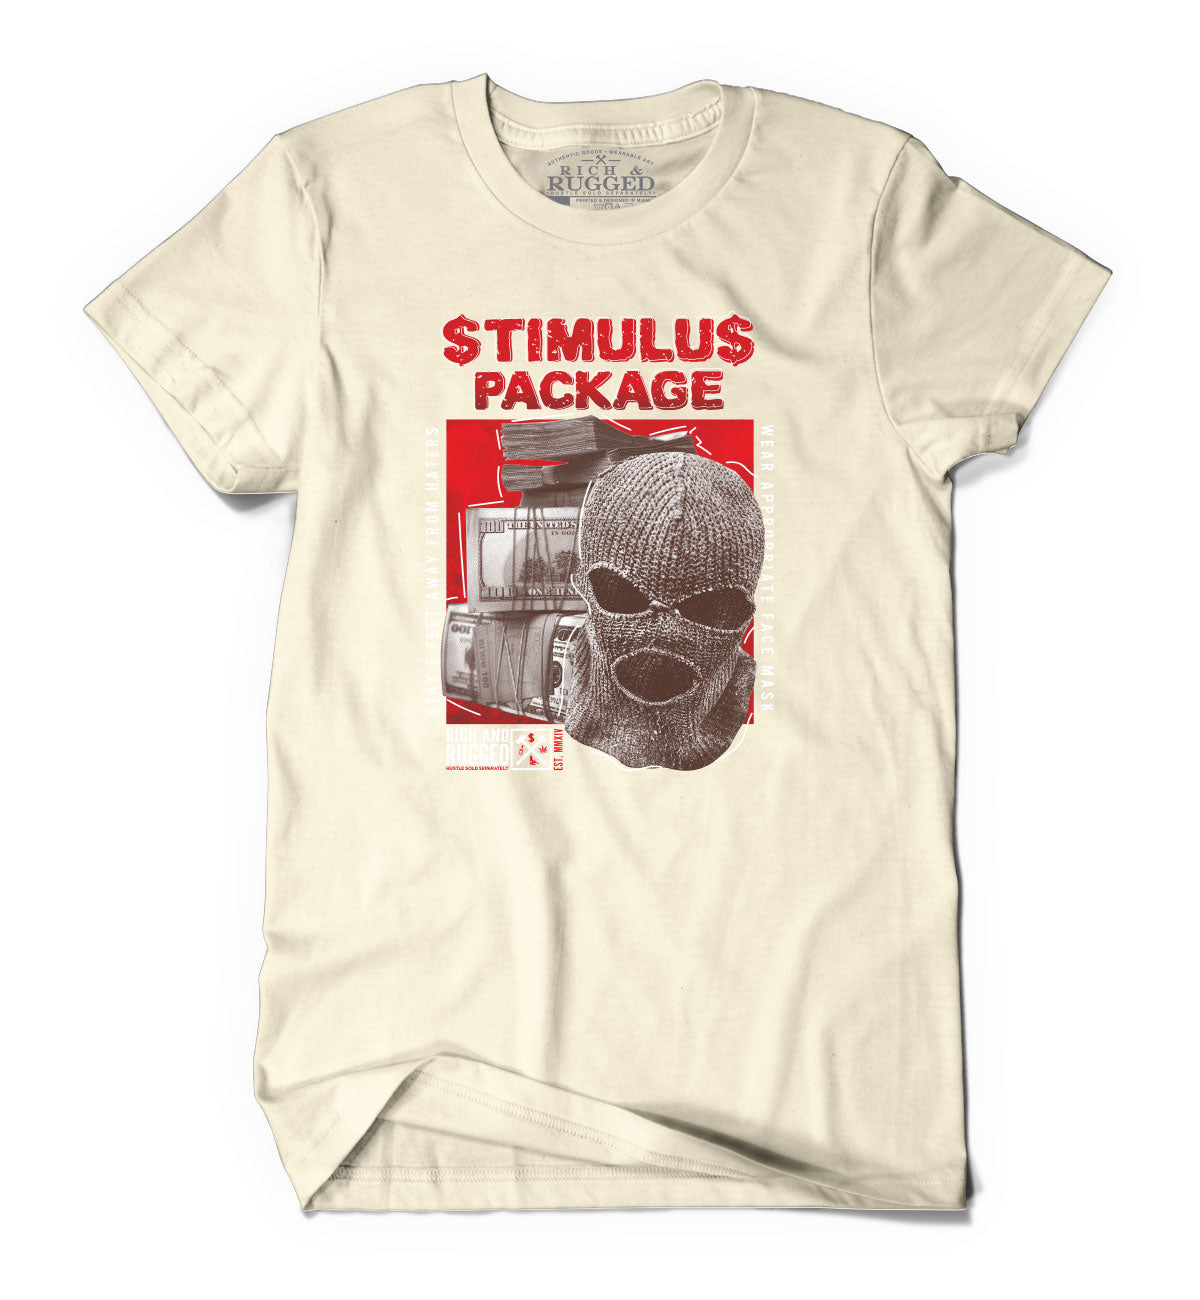 STIMULUS PACKAGE - NATURAL